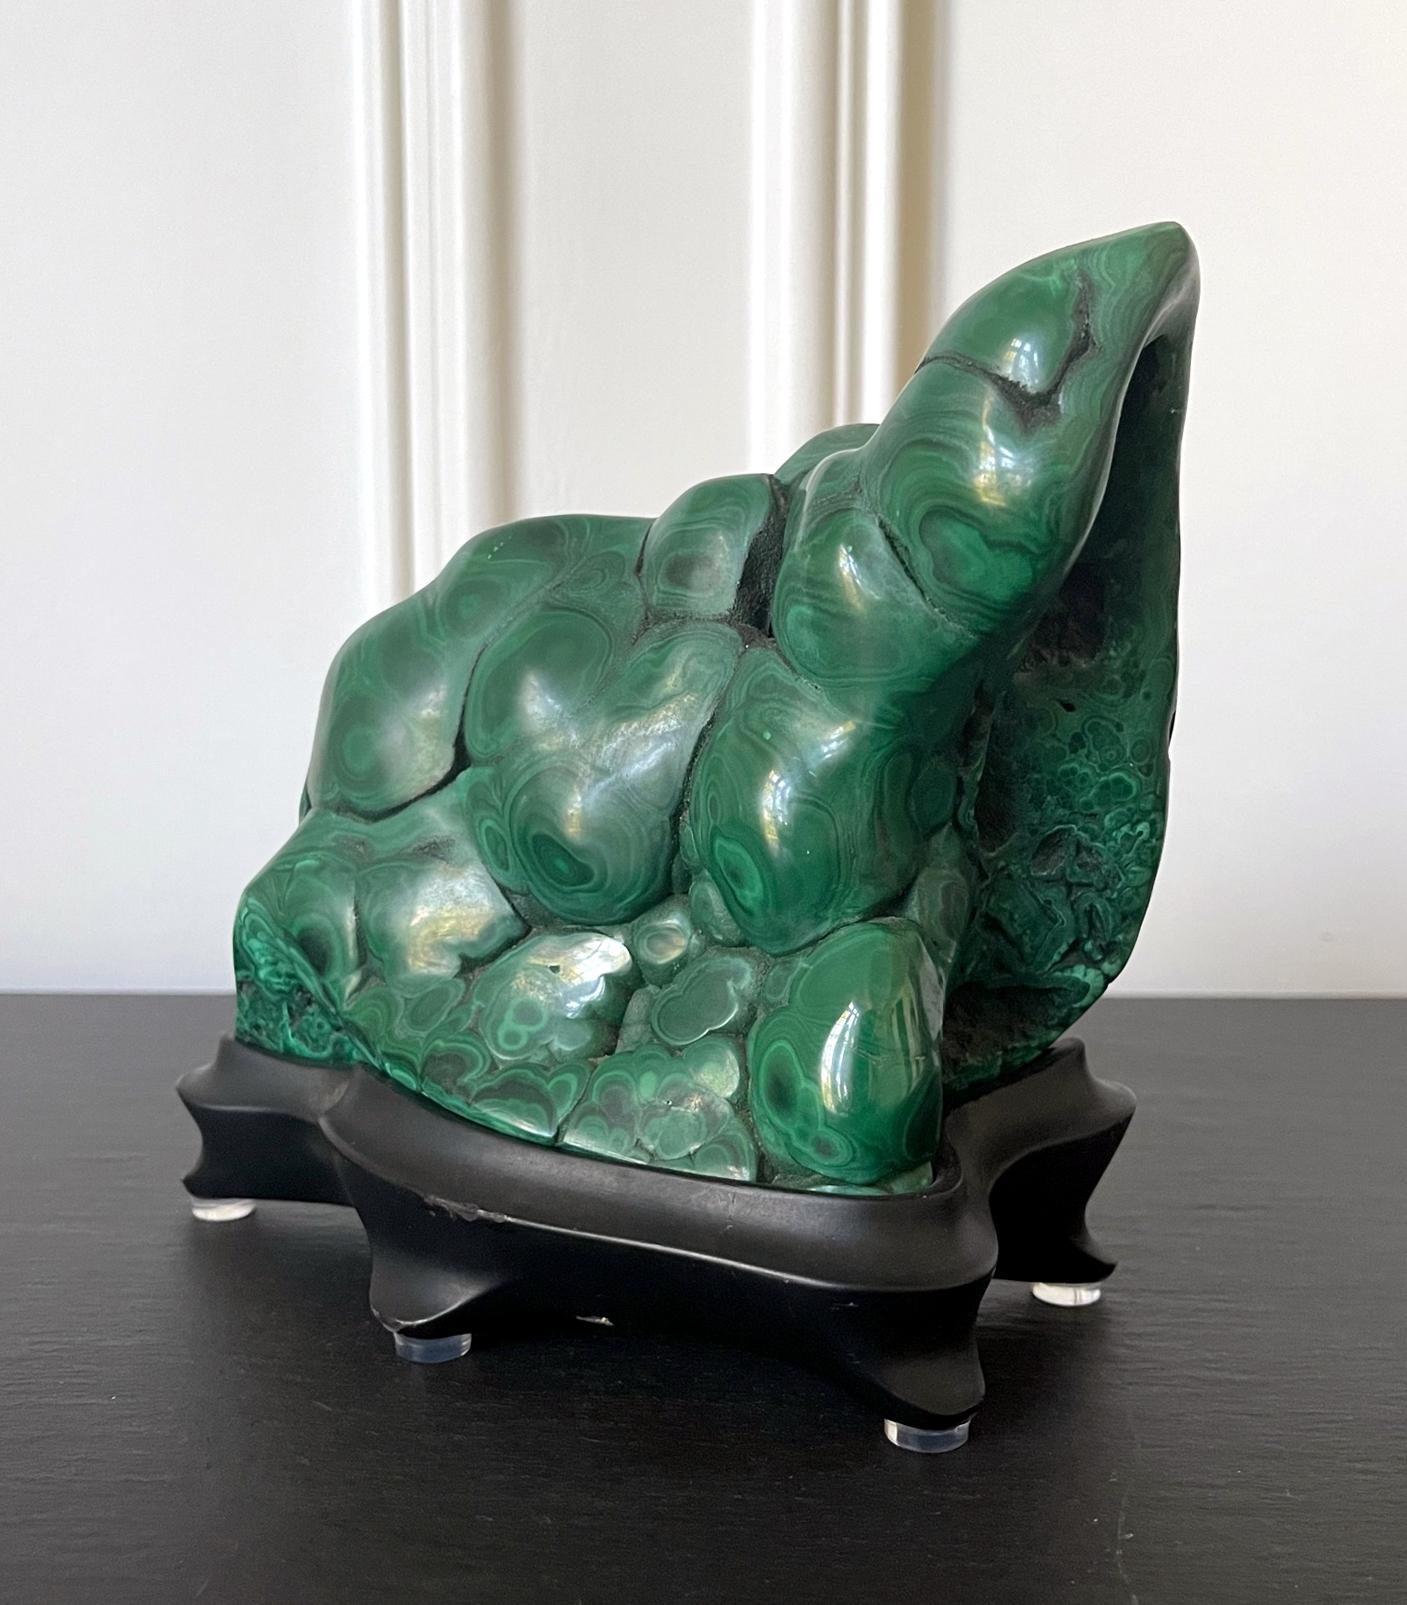 A malachite rock specimen with intense green and black colors fitted on a wood stand. The gemstone in the botryoidal form was polished in all sides except one side with a fissure to reveal the beautiful swirling patterns and colors. It is displayed